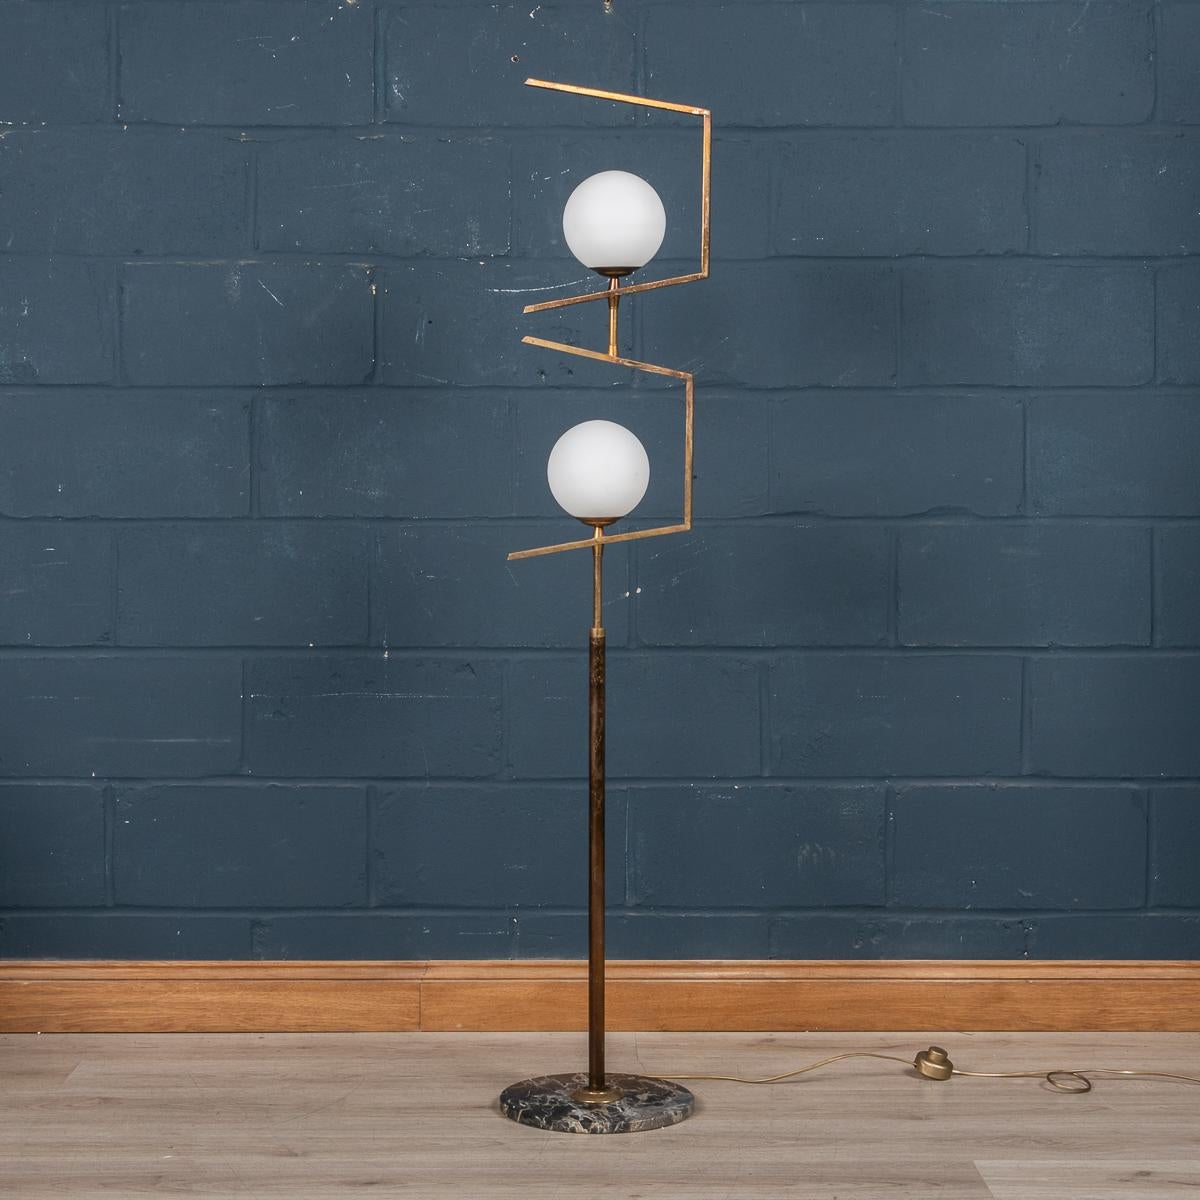 A beautiful floor lamp produced by Stilnovo, Milan, Italy. This lamp was produced in the 1960's and does not show its age at all both in terms of looks and condition. The geometric brass design holds two white opalescent diffusers, fastened to a